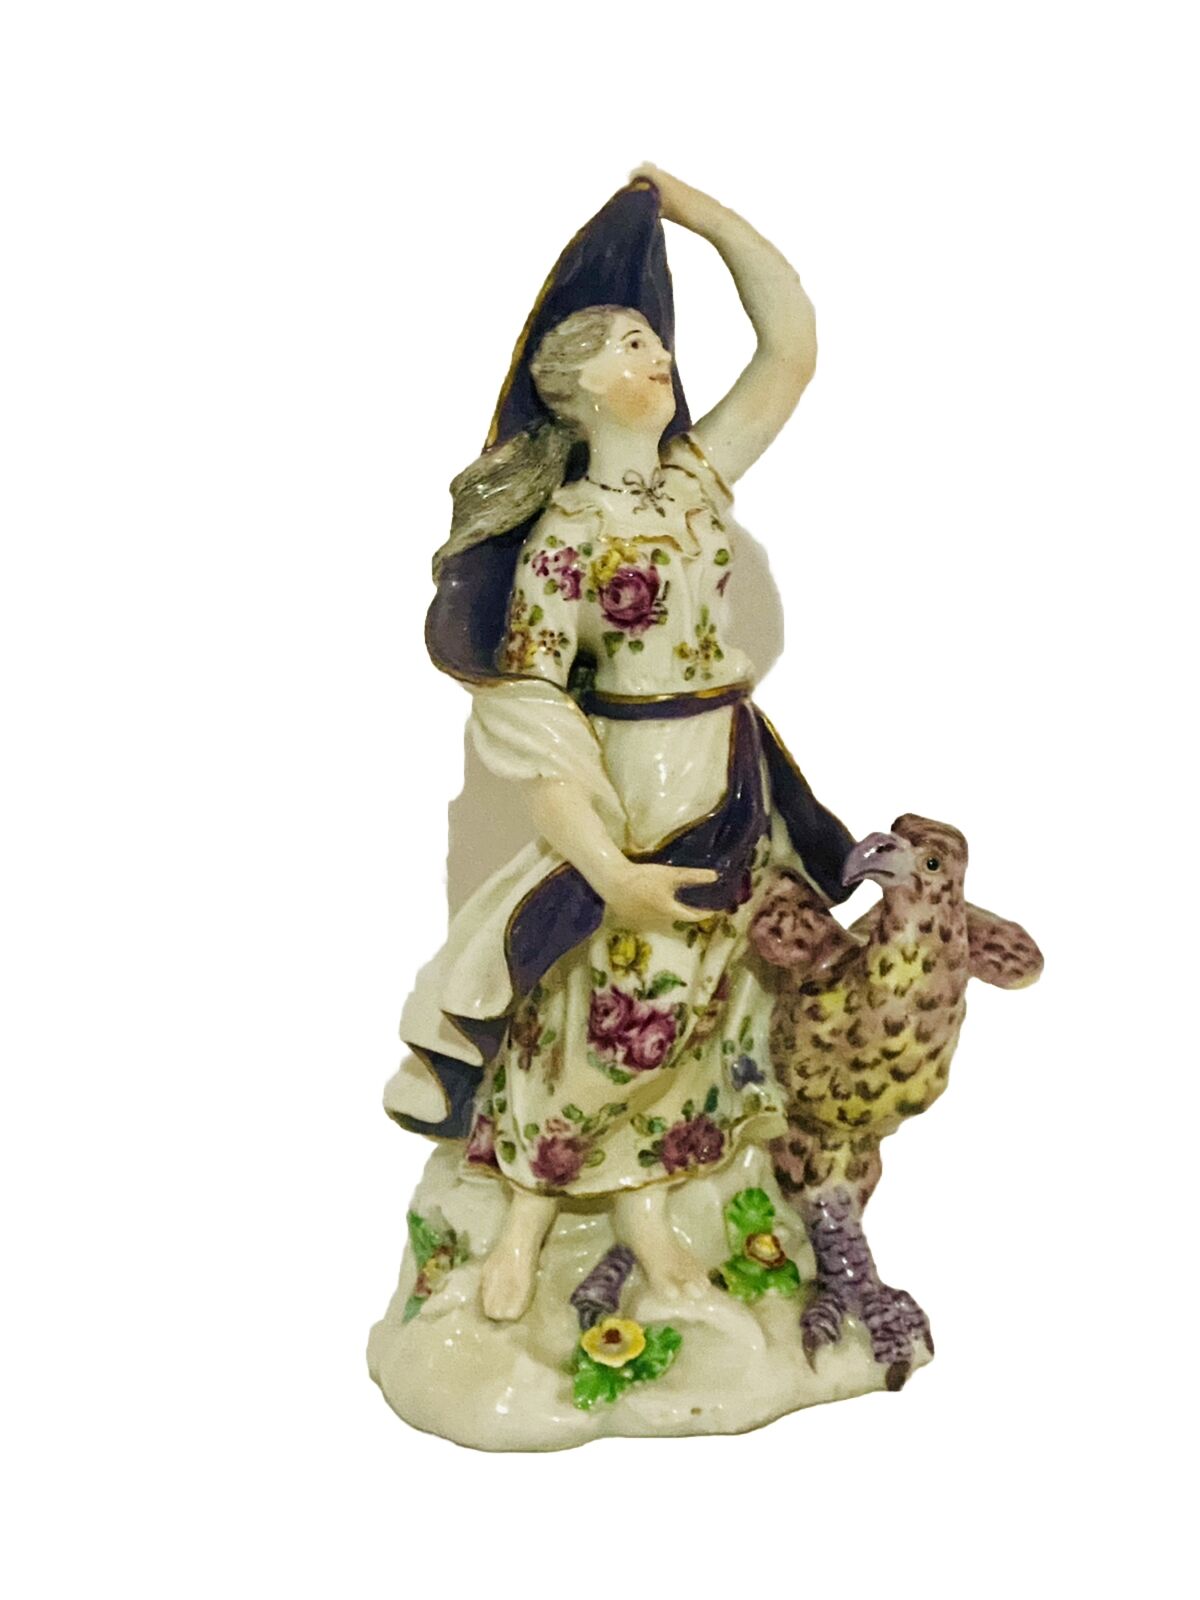 Antique 18thC Bow Hand Painted Porcelain Figurine (AIR) From The 4 Elements 8.5”